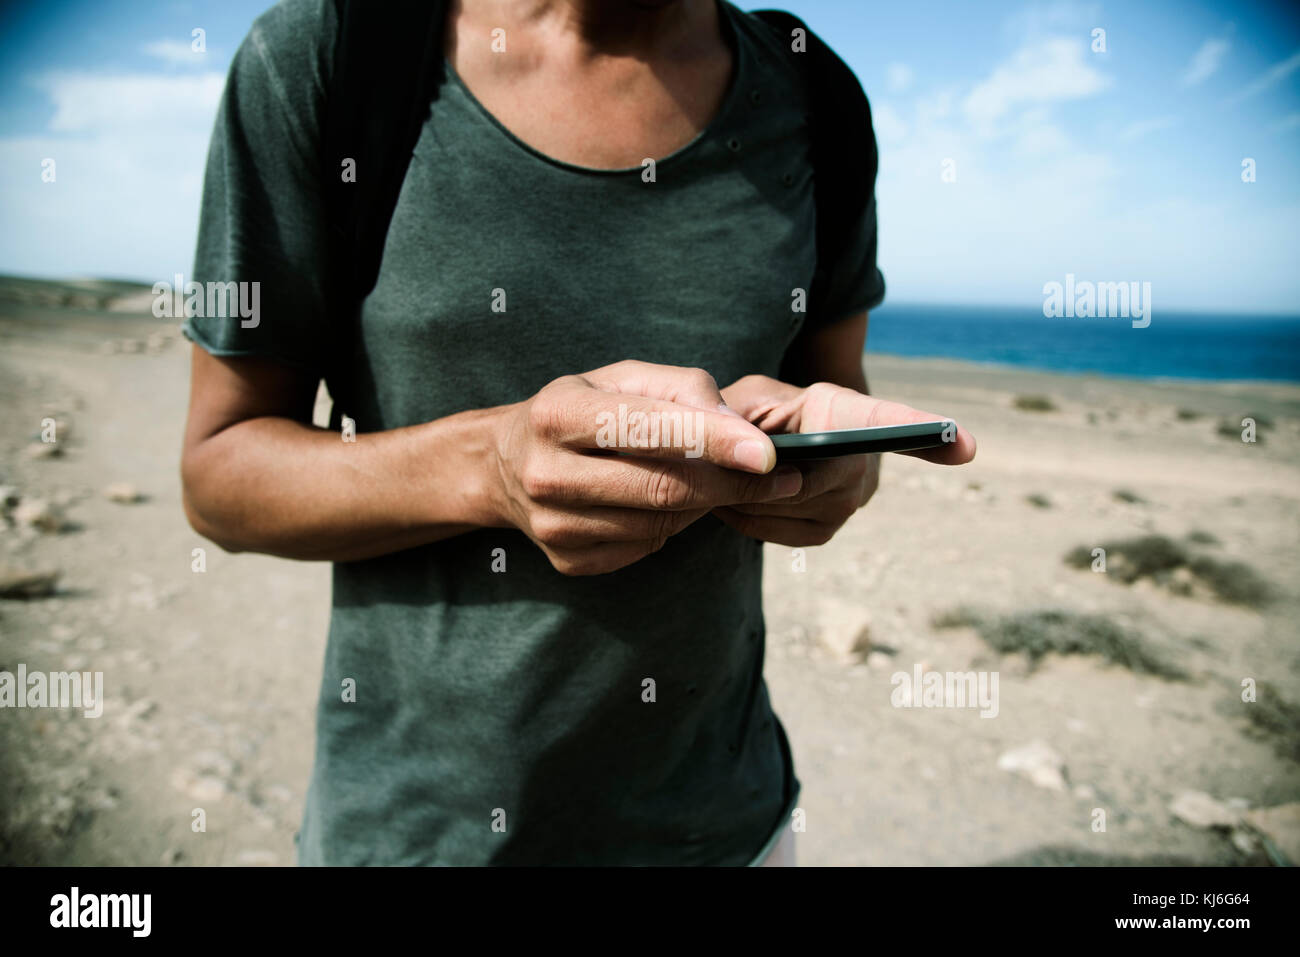 closeup of a young caucasian man carrying a backpack using a smartphone in a natural landscape, with the ocean in the background, with a vignette adde Stock Photo